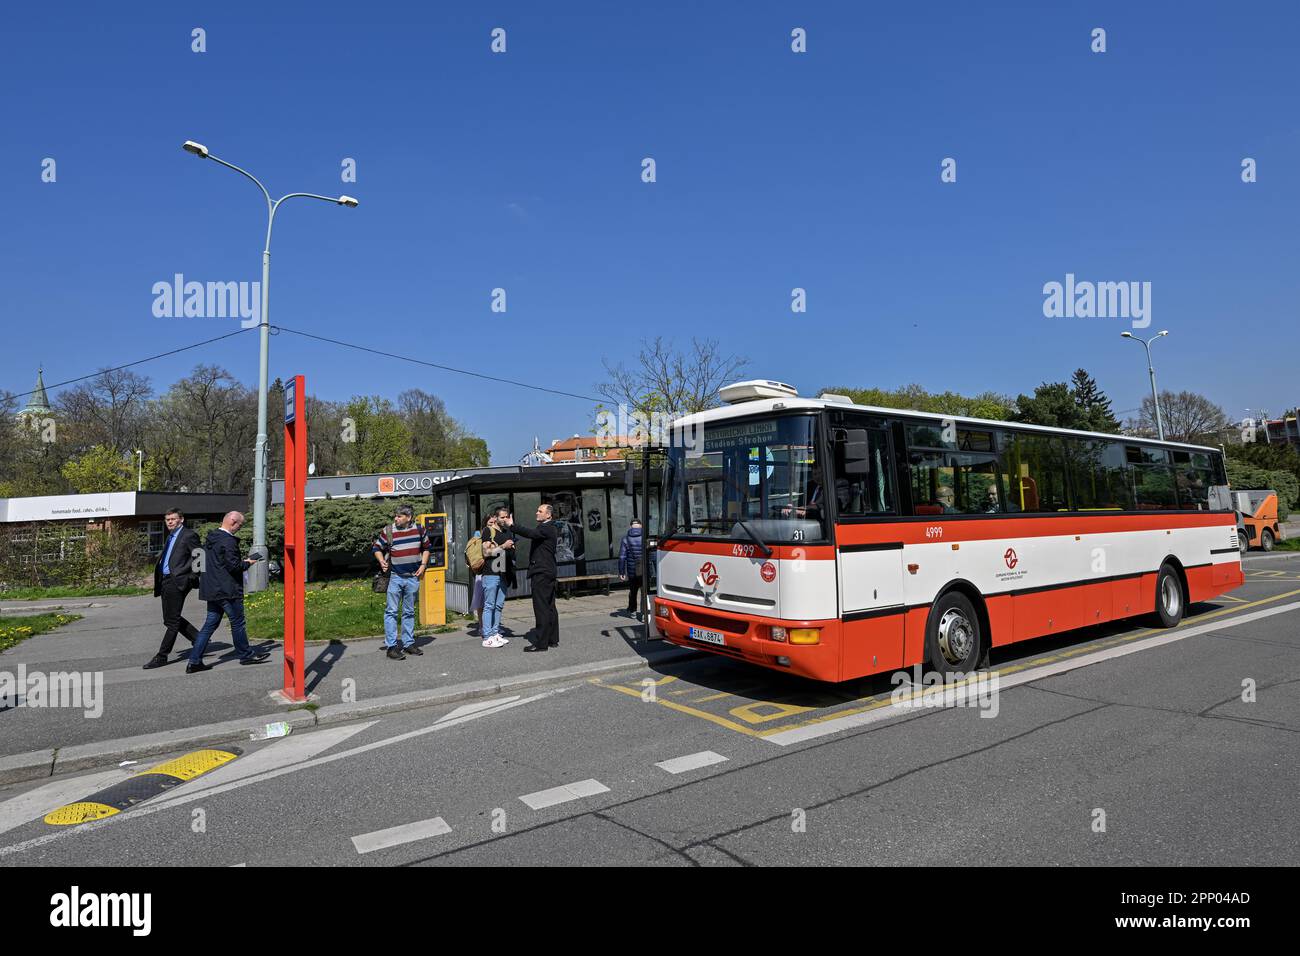 The Prague Public Transit Company has introduced a new historic bus line marked with the letter K running along the route of the original trolleybus line of the same name, which ran from August 1936 to 1959 between Stresovice and Svaty Matej in Dejvice. Karosa B951 bus with registration number 4999 from 2004 is pictured in Prague, Czech Republic, April 21, 2023. (CTK Photo/Vit Simanek) Stock Photo